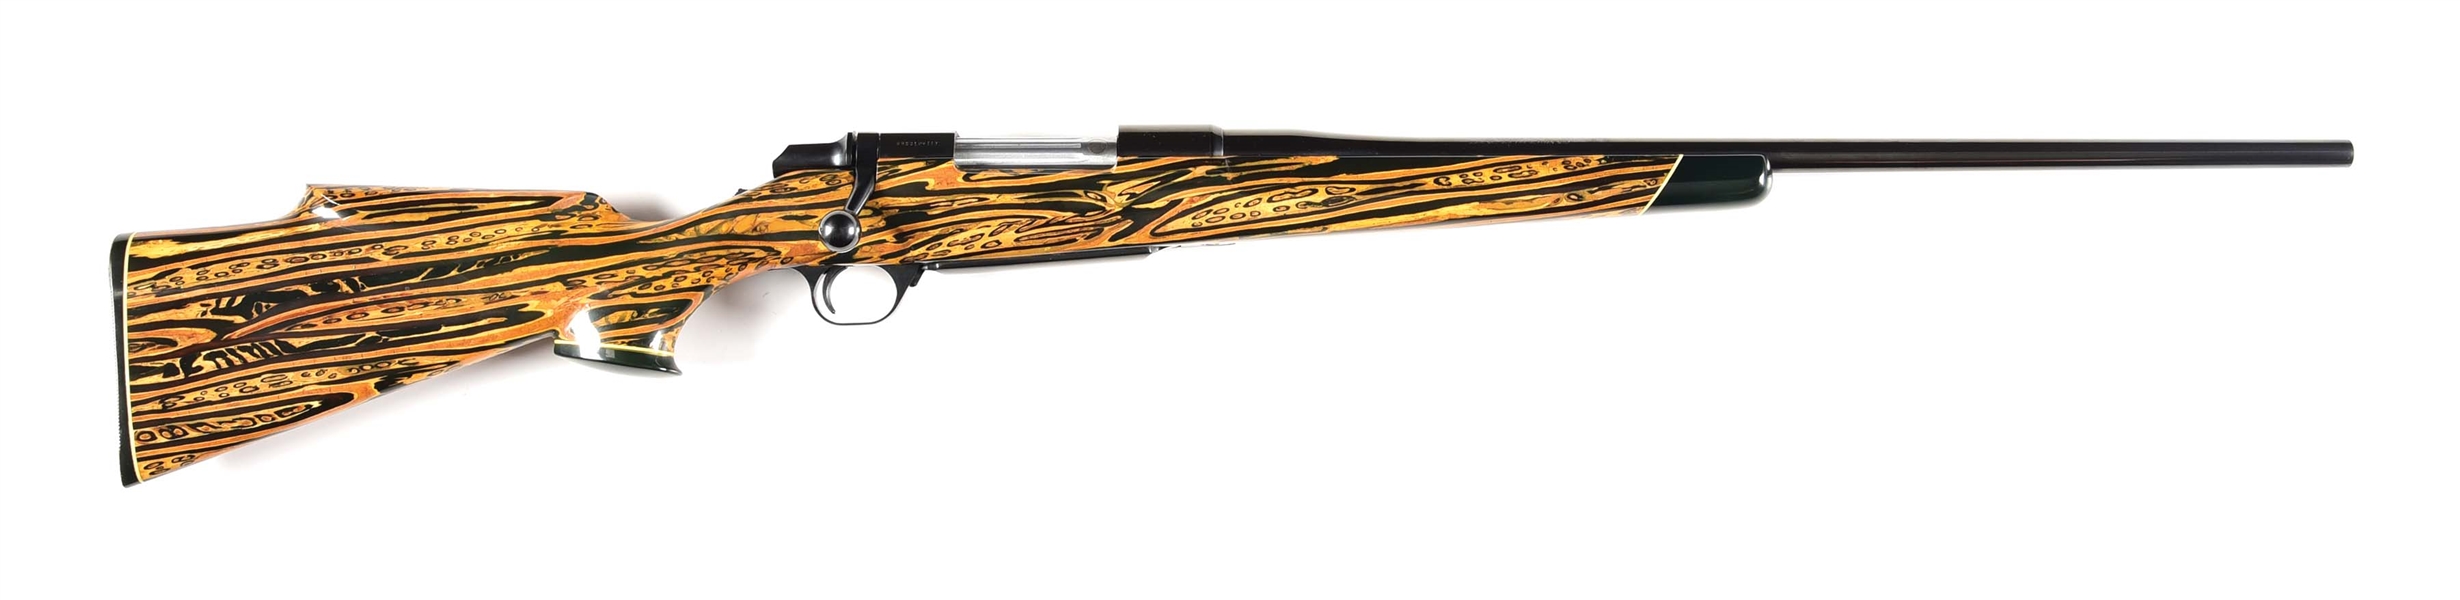 (M) PONGA STOCKED BROWNING BBR BOLT ACTION RIFLE.